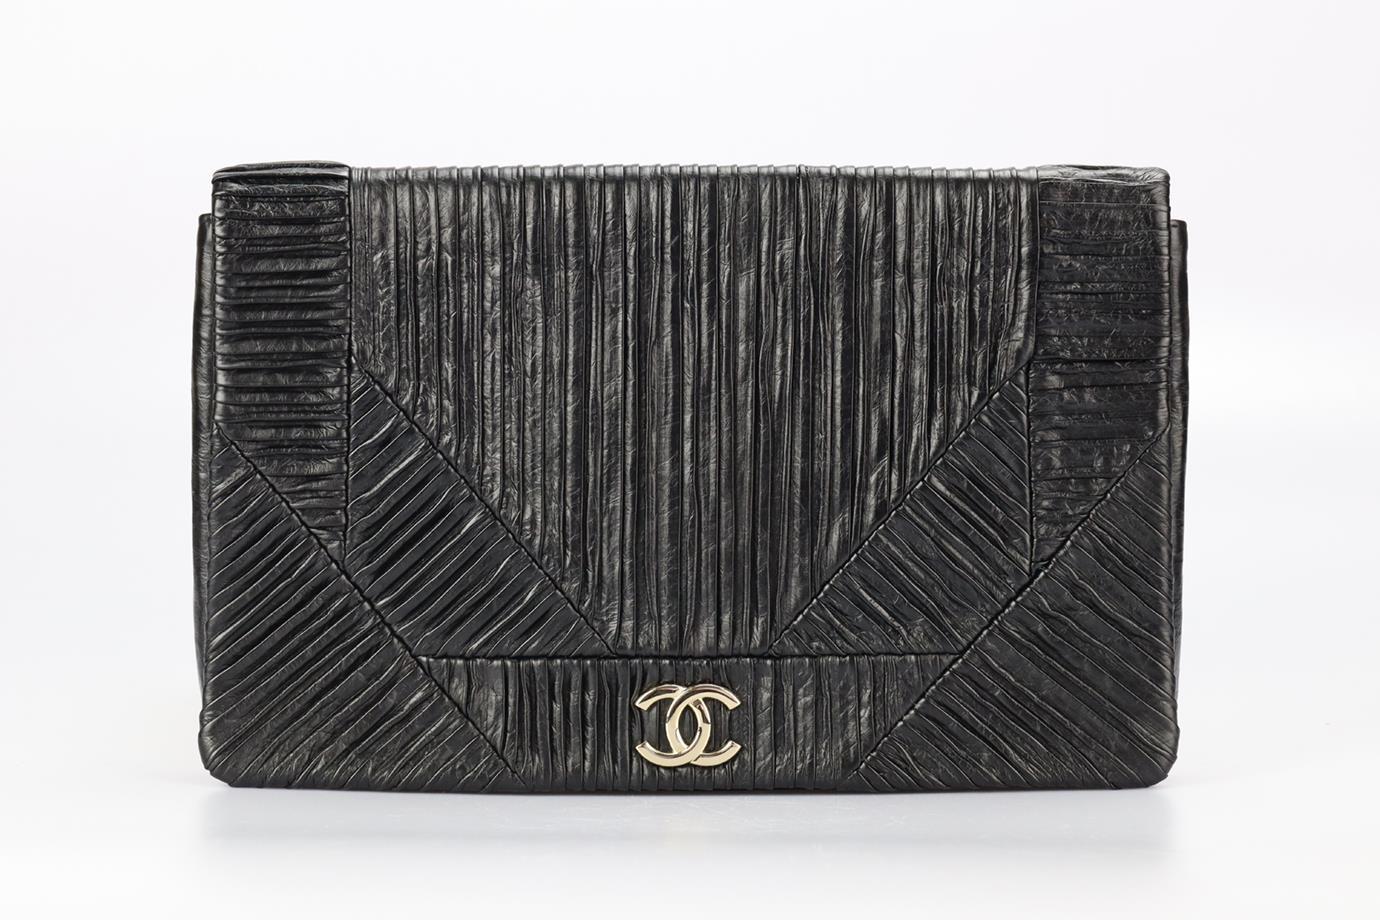 Chanel 2018 Coco Pleats Medium Leather Clutch. Black. Magnetic fastening - Front. Comes with - dustbag and authenticity card. Height: 8.7 in. Width: 13.8 in. Depth: 1 in. Condition: Used. Very good condition - Protective plastic attached to most